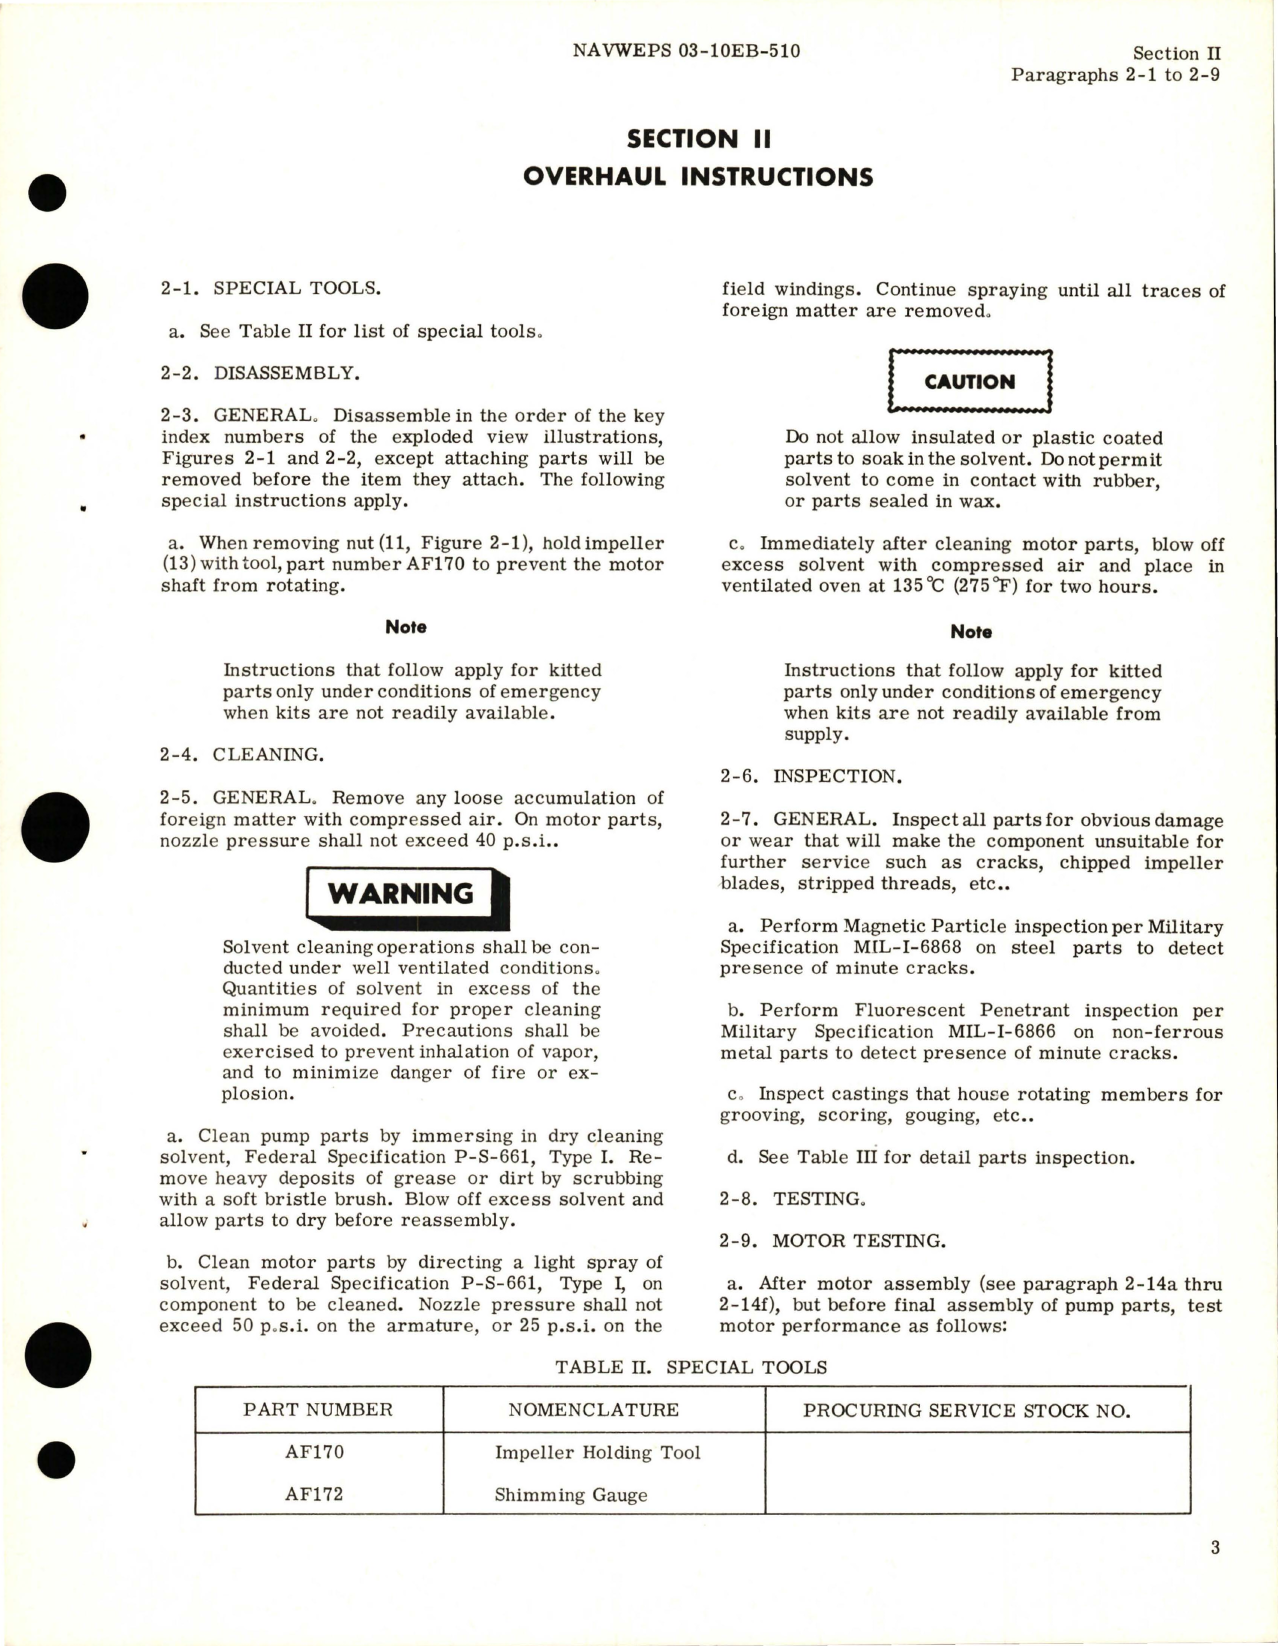 Sample page 7 from AirCorps Library document: Overhaul Instructions for Centrifugal Fuel Booster Pump - Models RG11250, RG11250A, and RG11250A1 